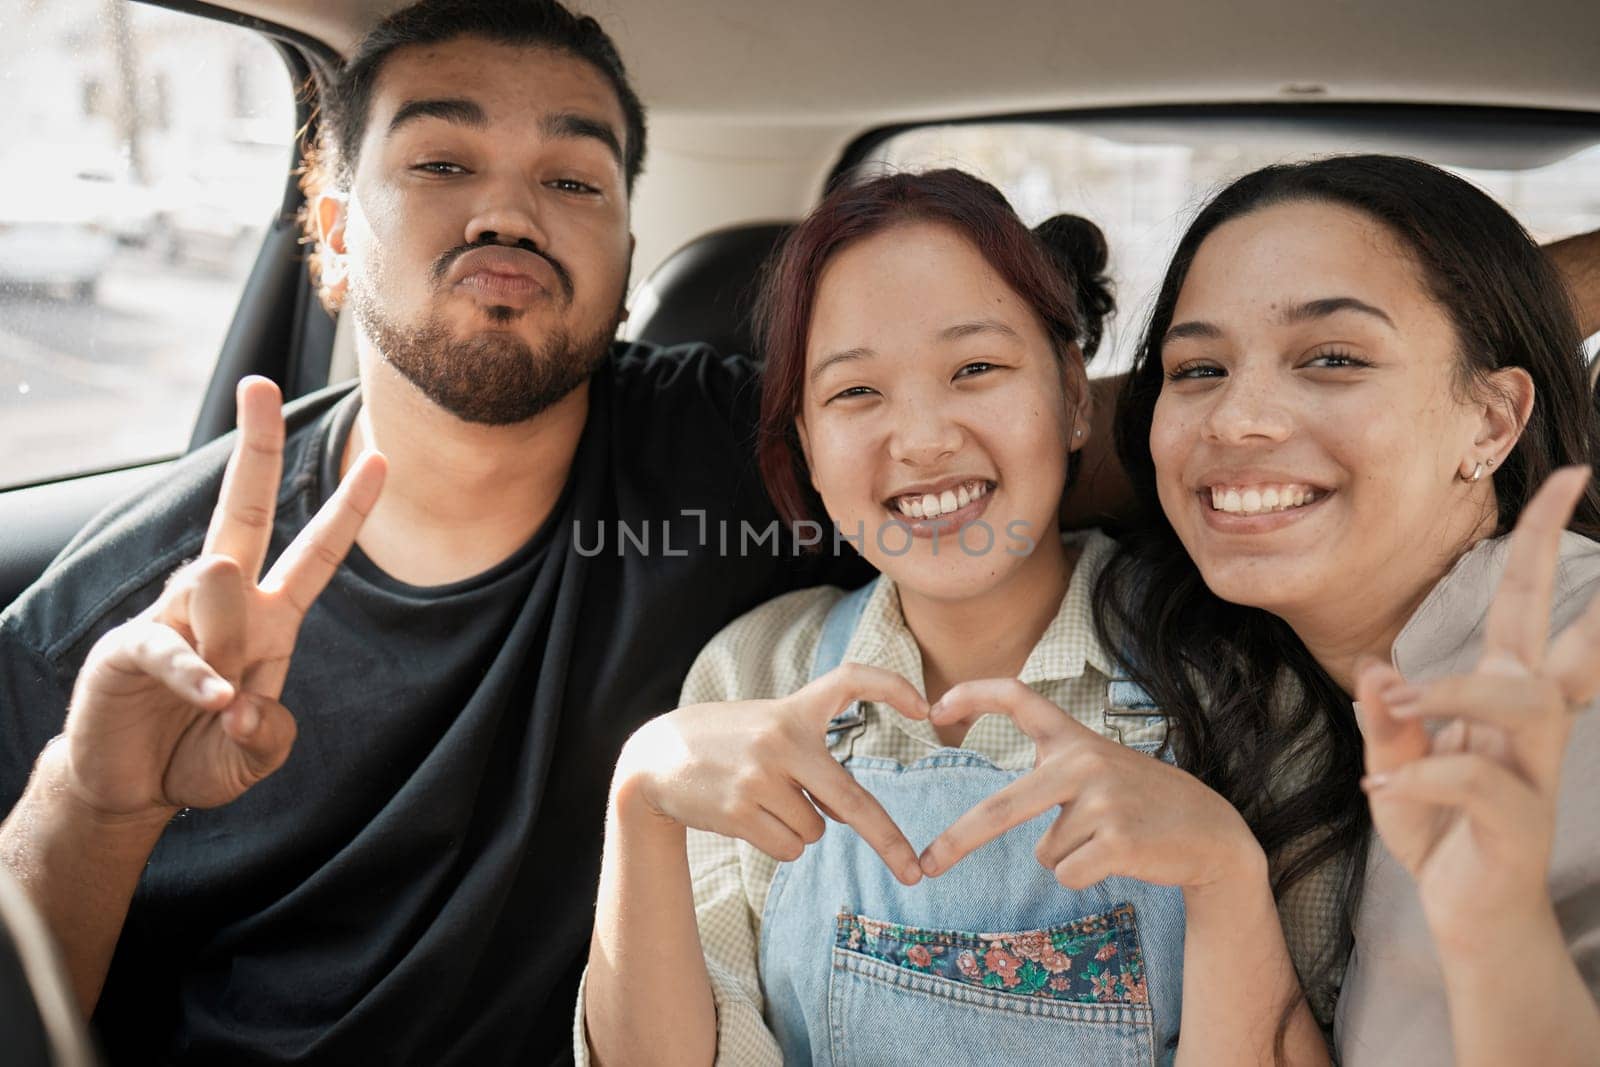 Friends, road trip and hand gesture with a man and woman group making peace and heart shape sign in a car. Diversity, travel and transportation with a male and female friend bonding in a vehicle.